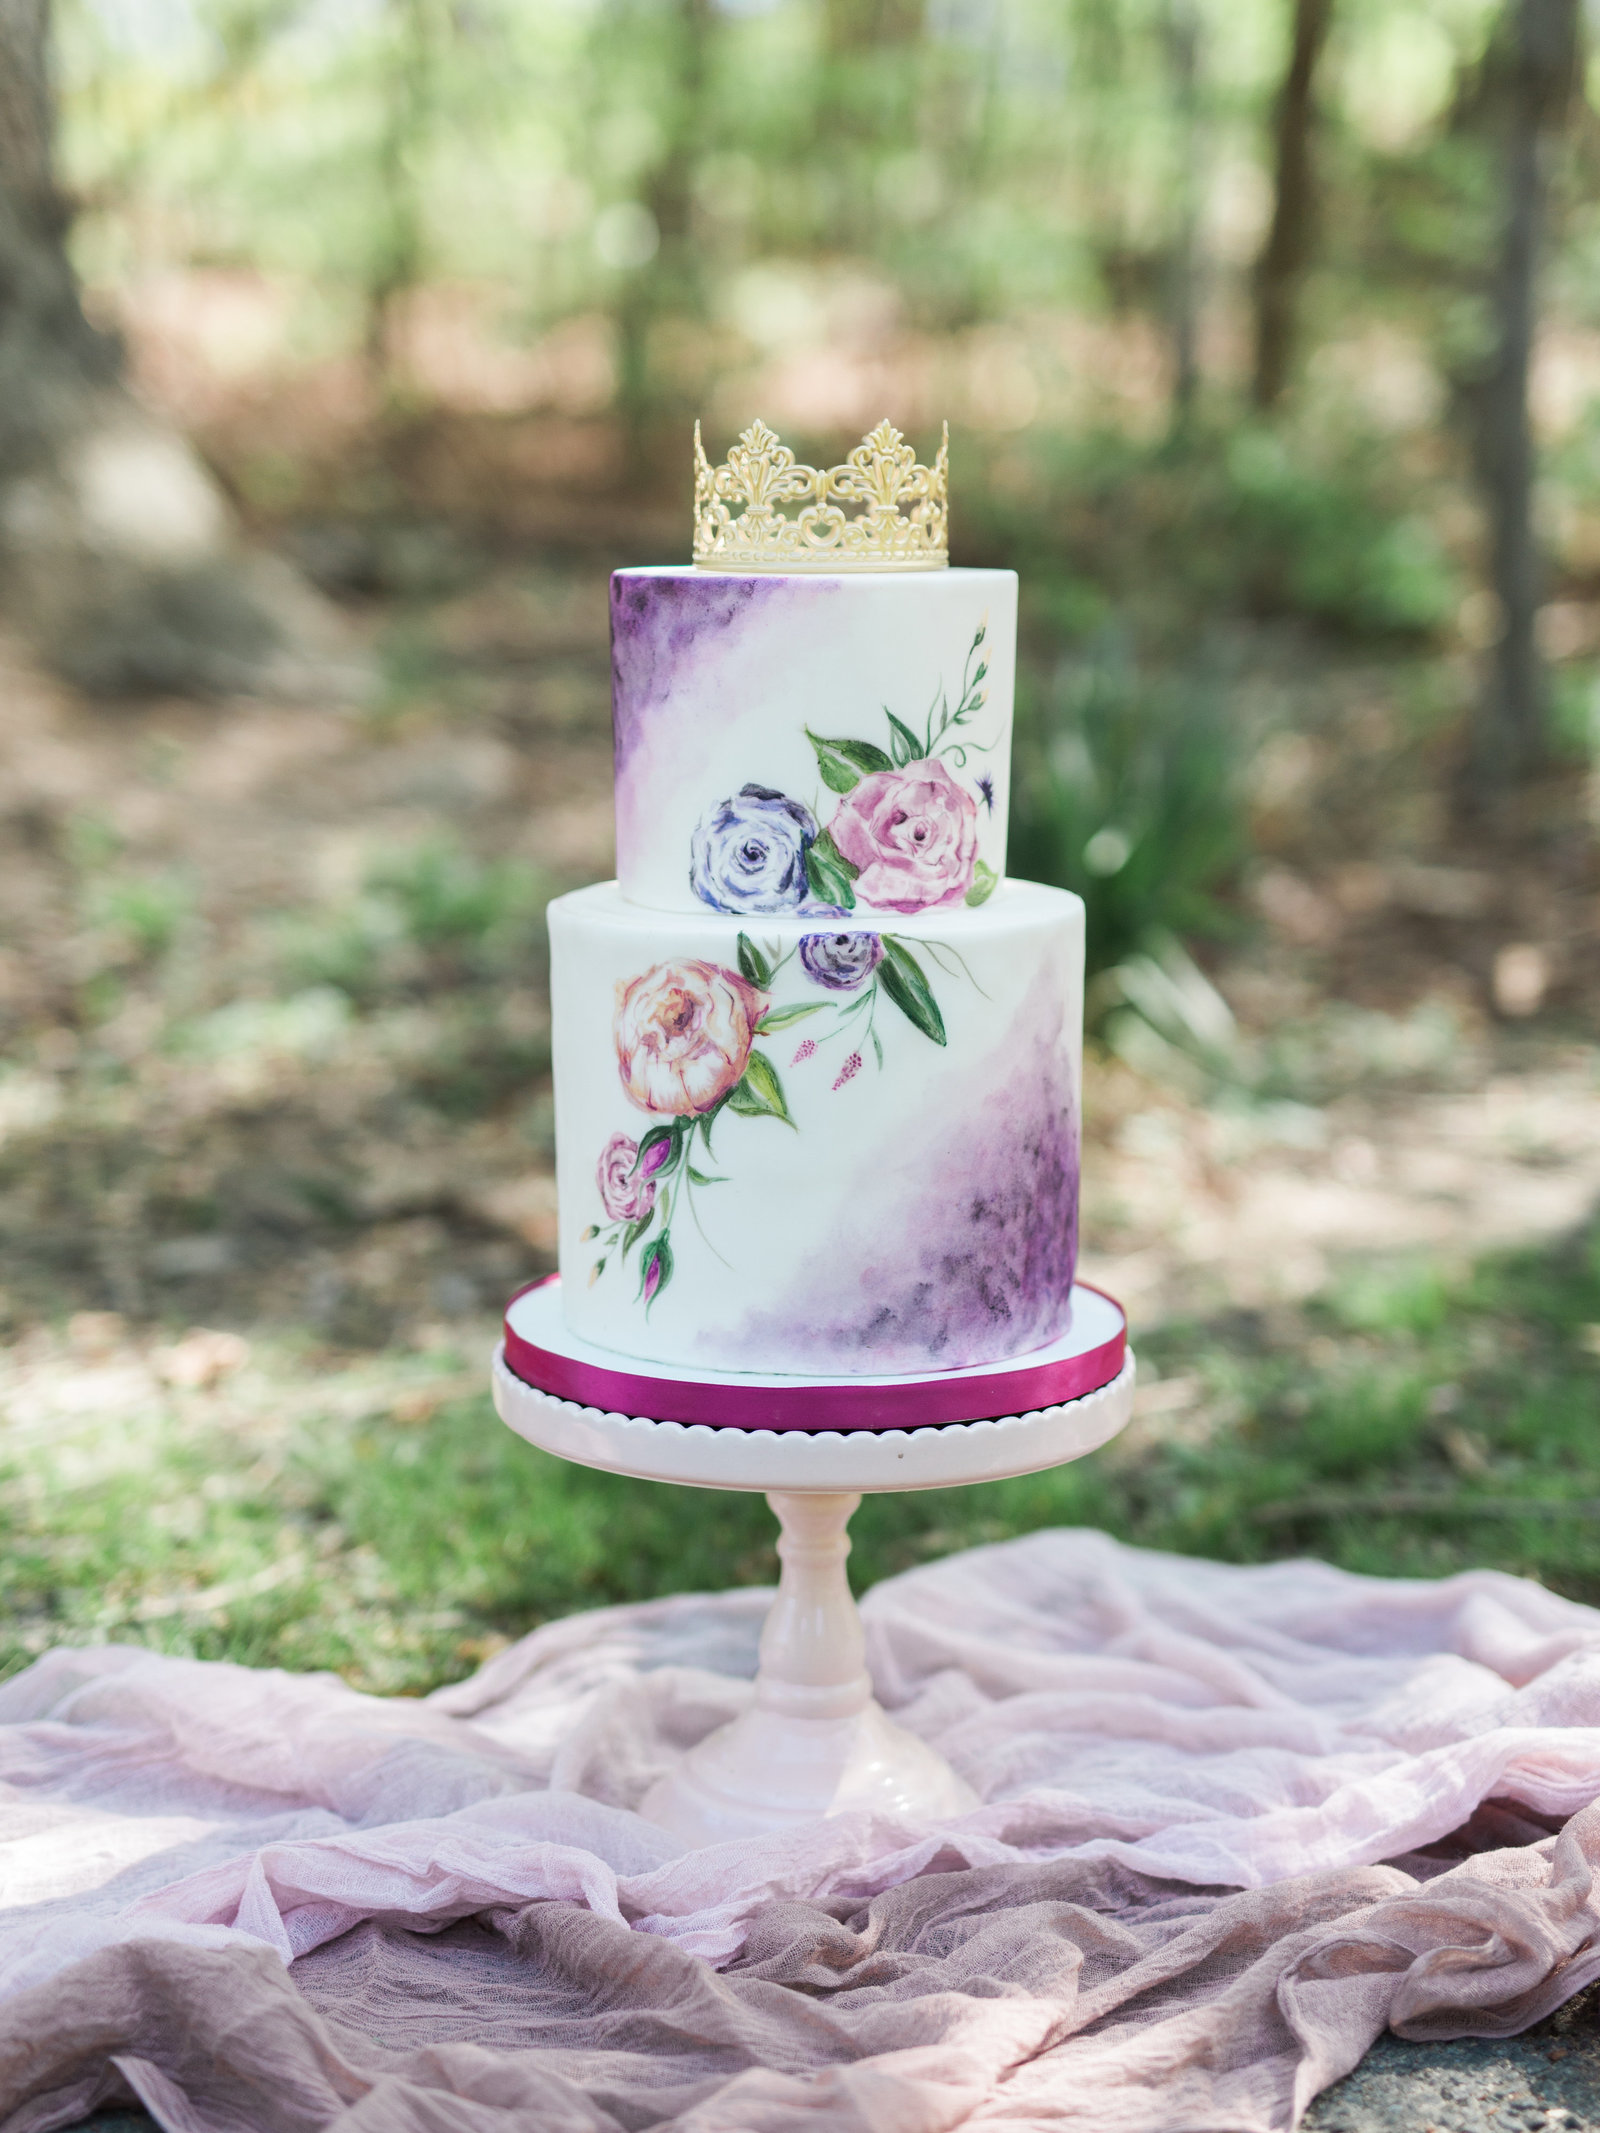 Sleeping Beauty  wedding cake  Inspired Styled Shoot at Swannanoa-Images for Submissi-0166 (2)